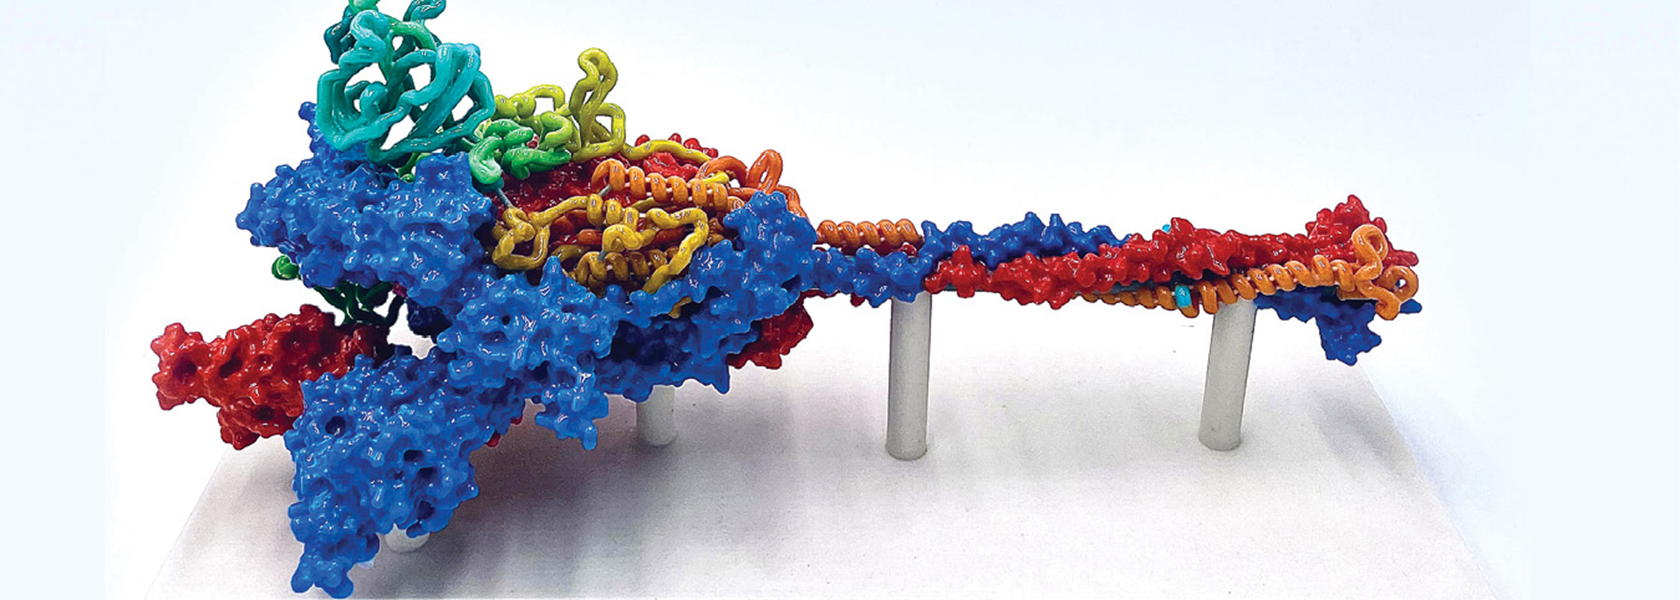 A 3D-printed SARS-CoV-2 spike glycoprotein model